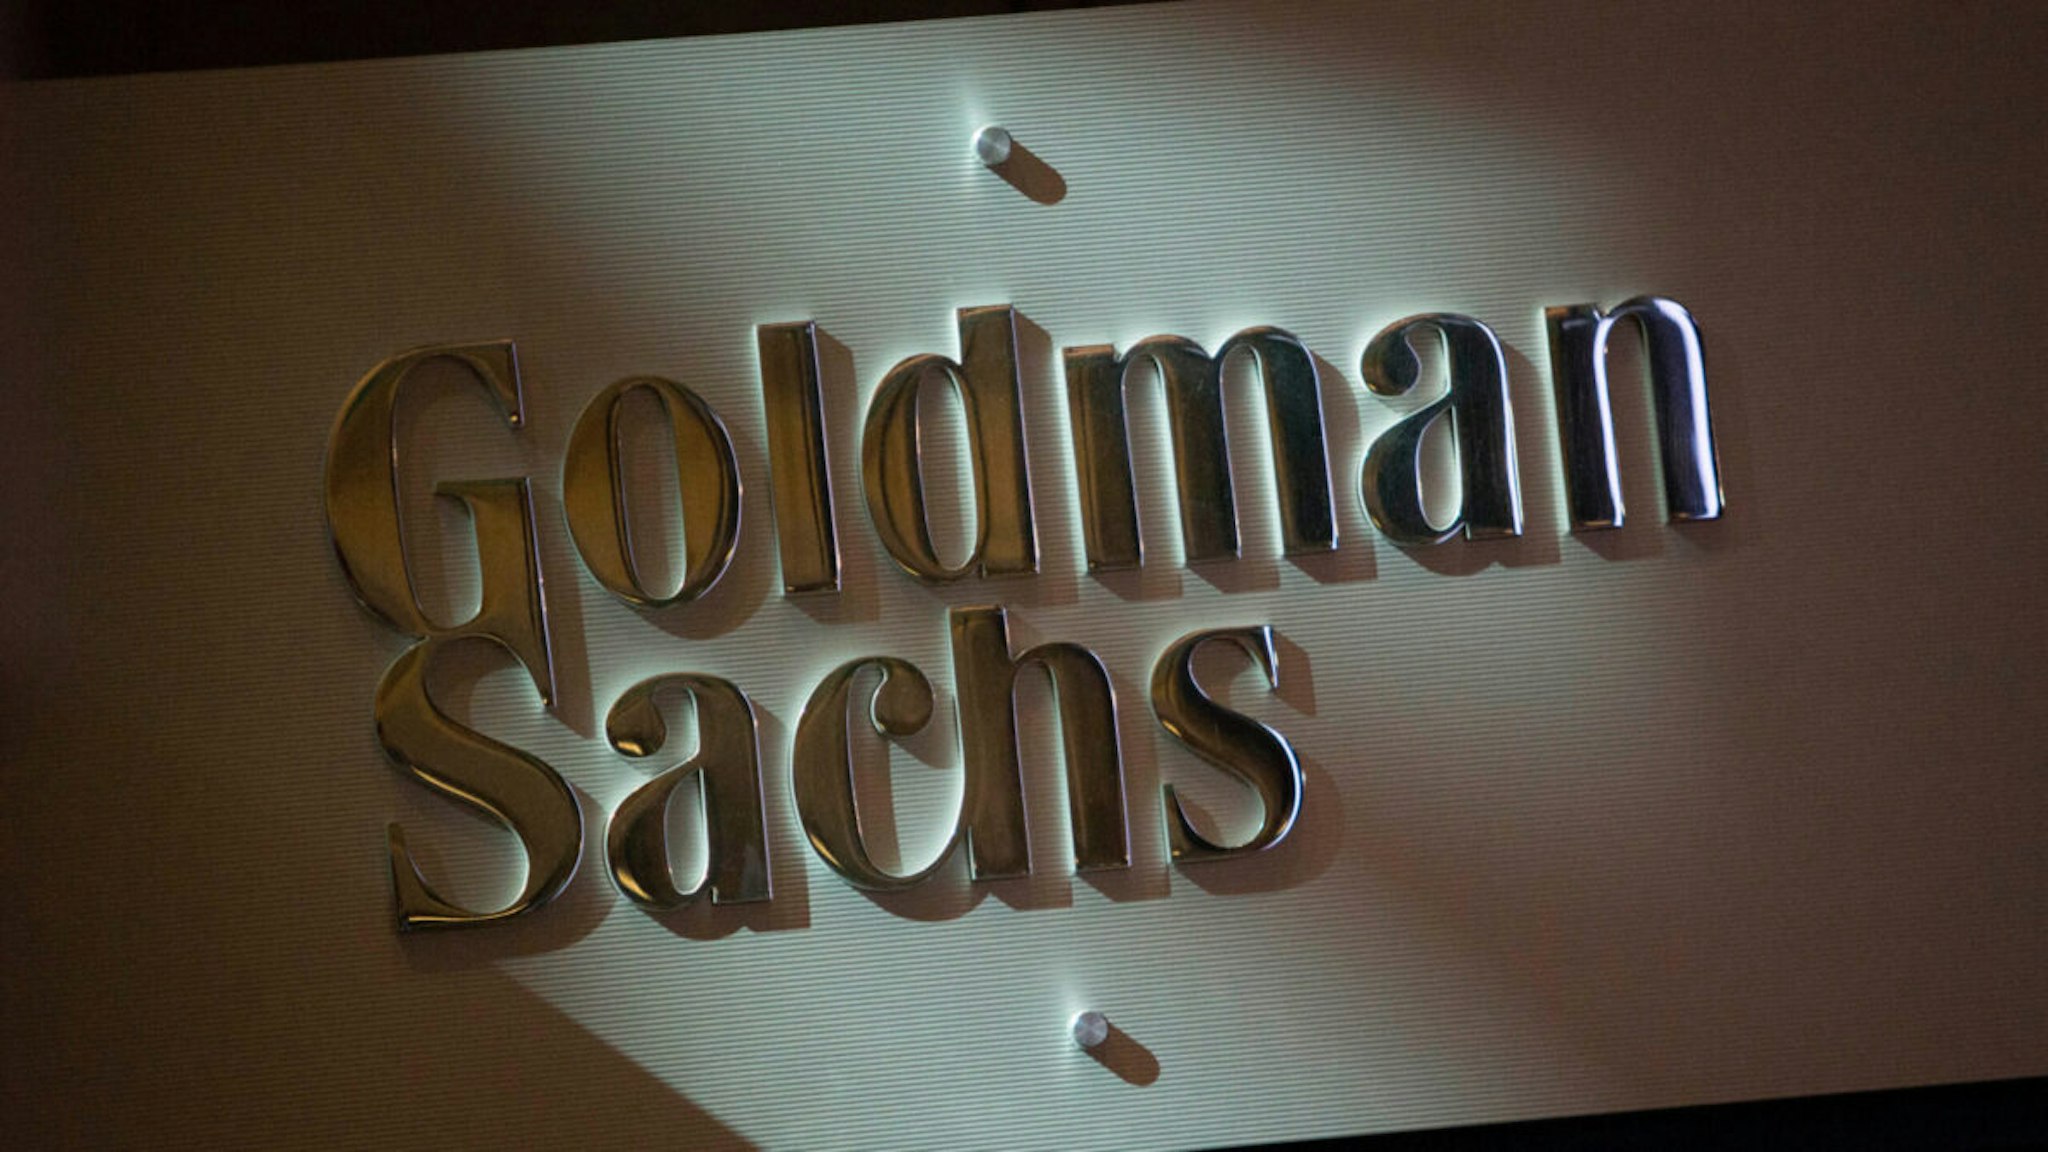 The Goldman Sachs & Co. logo is displayed at the company's booth on the floor of the New York Stock Exchange (NYSE) in New York, U.S., on Friday, July 19, 2013.